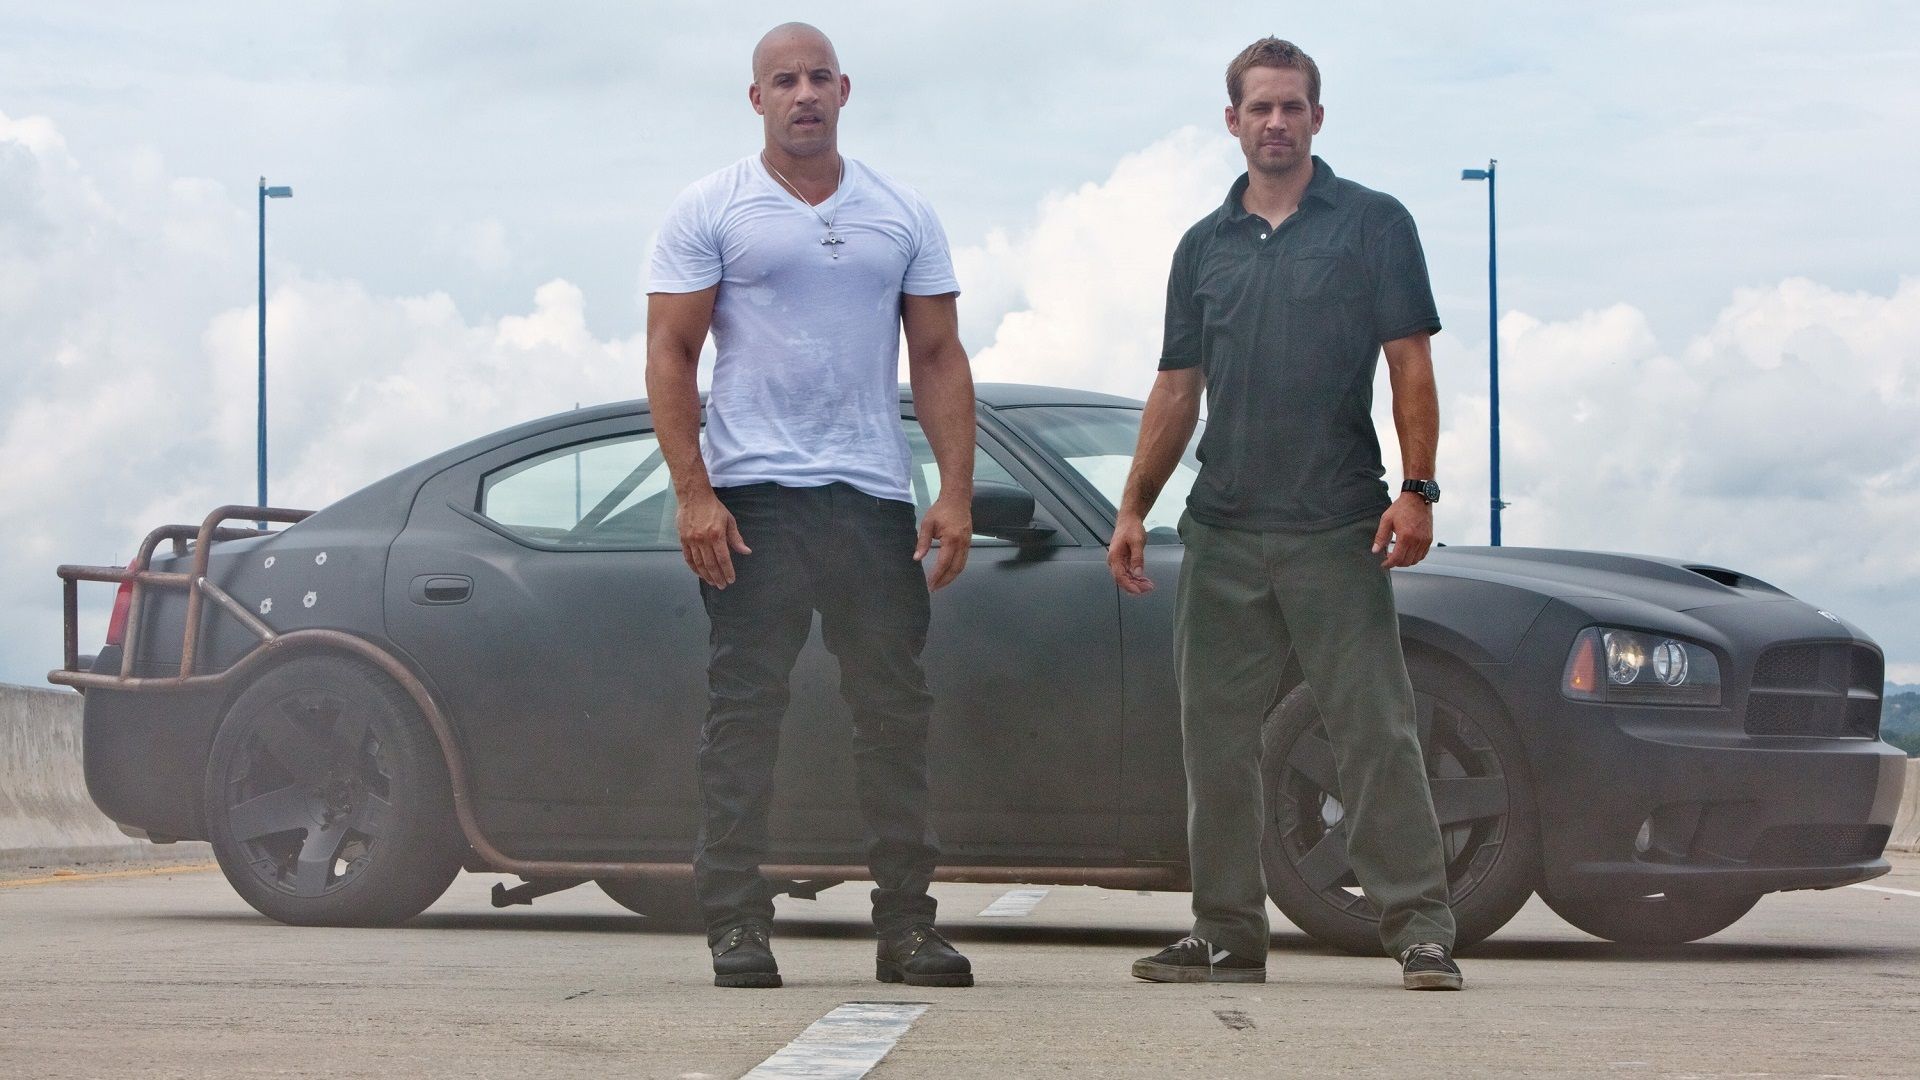 The Fast and the Furious wallpaper and furious wallpaper